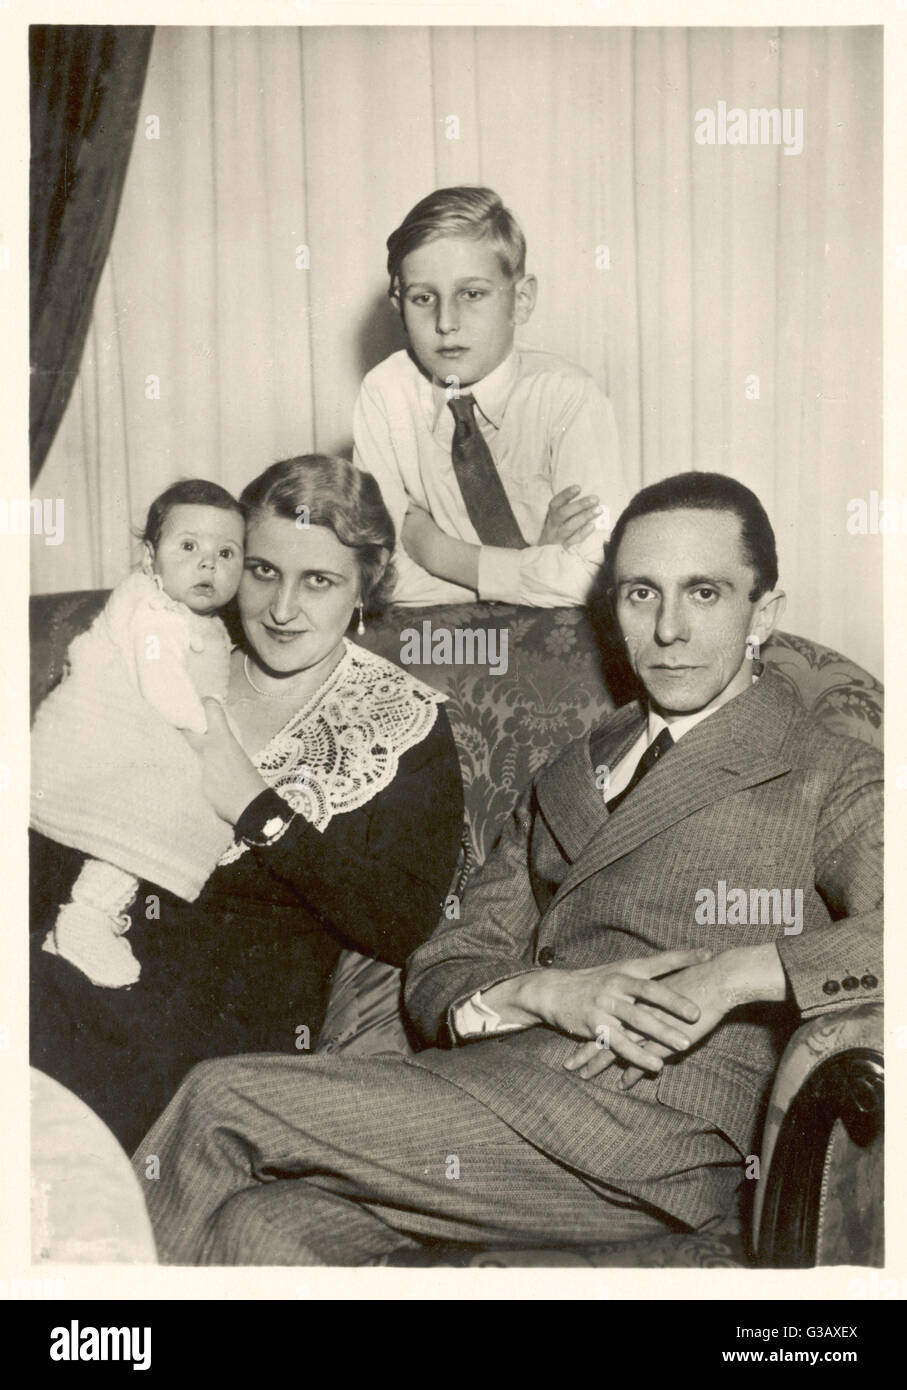 PAUL JOSEPH GOEBBELS, his wife  Magda, and two of their  children who died with them in  the Fuhrerbunker, April 1945       Date: 1897 - 1945 Stock Photo